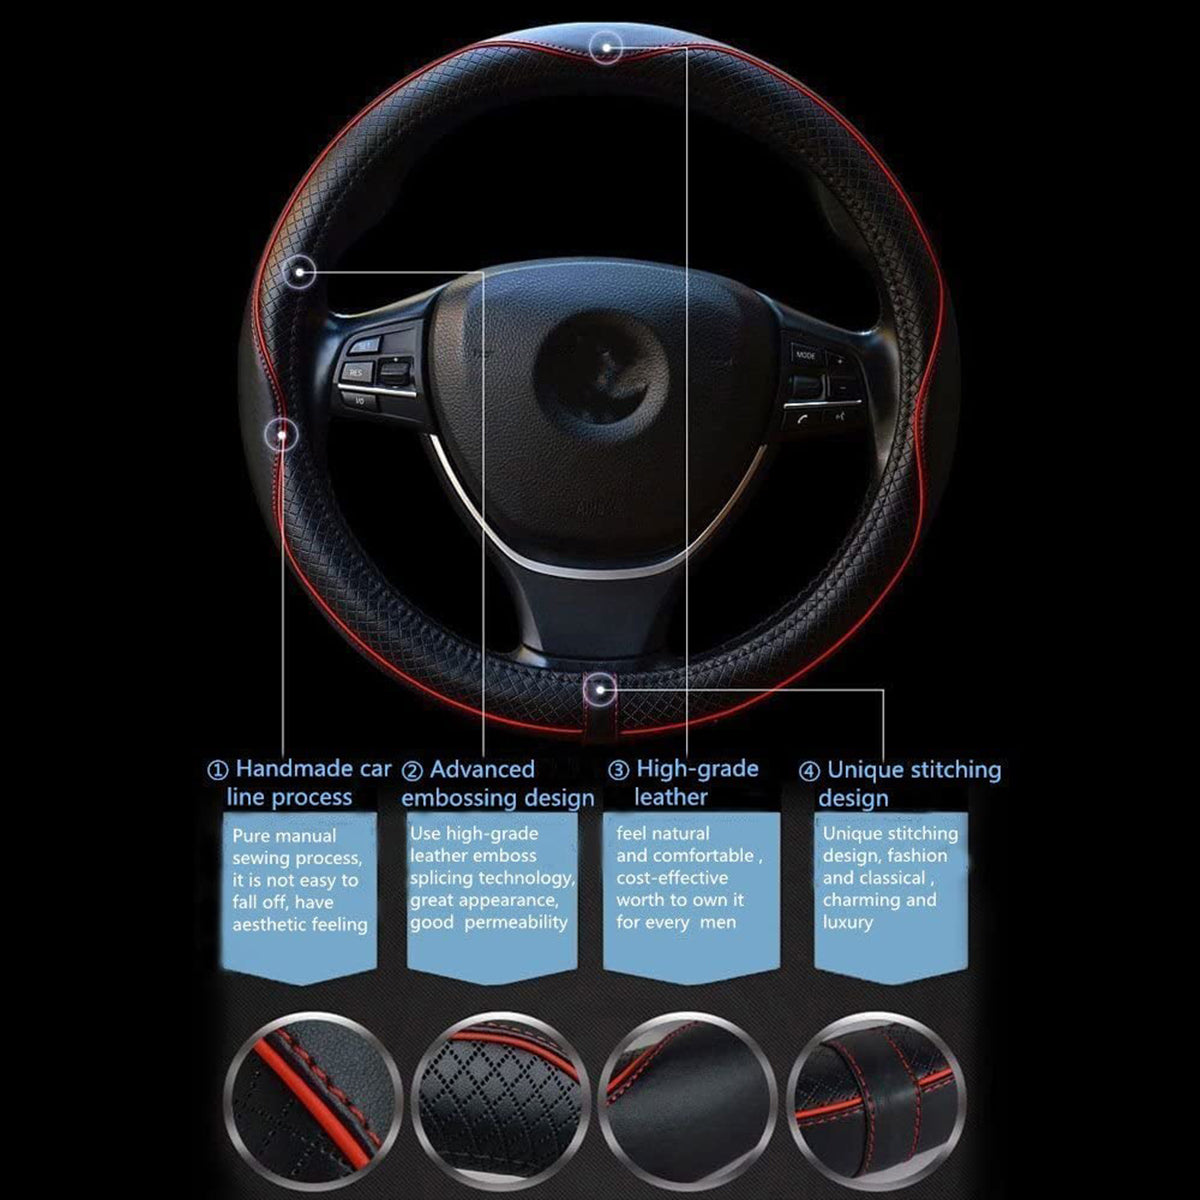 Car Steering Wheel Cover, Custom For Your Cars, Anti-Slip, Safety, Soft, Breathable, Heavy Duty, Thick, Full Surround, Sports Style, Car Accessories HA18990 - Delicate Leather